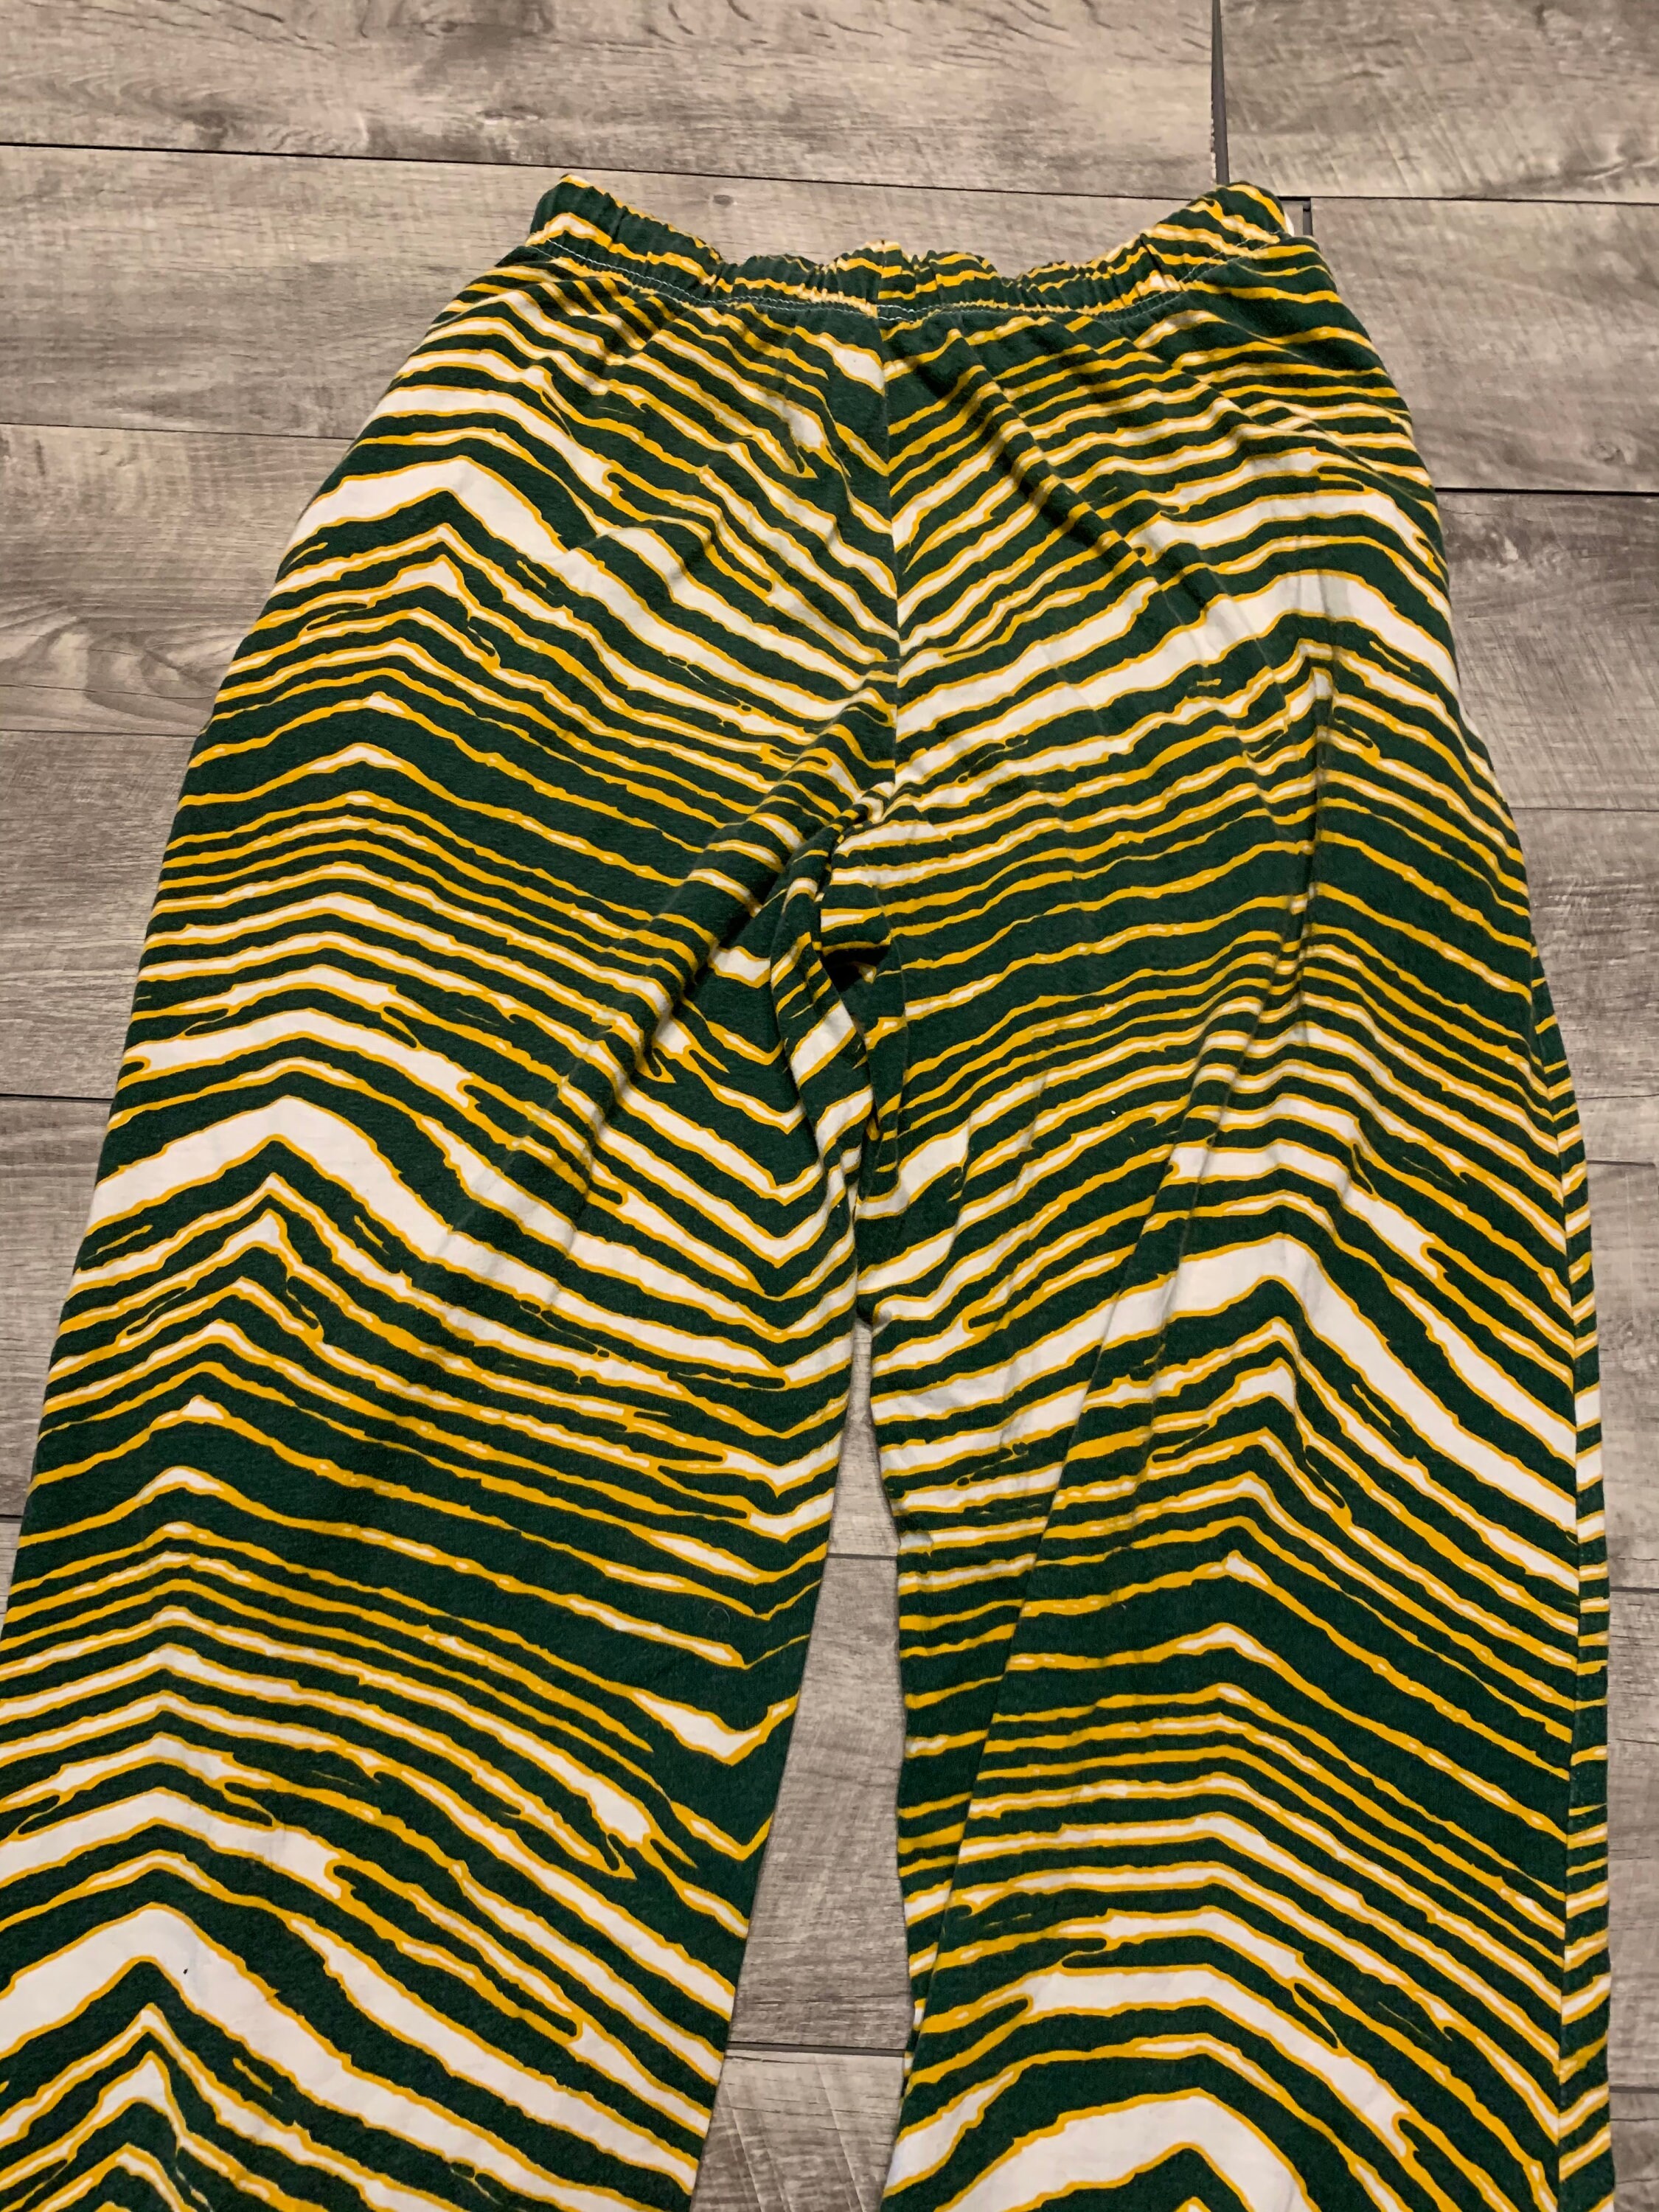 Vintage Zubaz Green  Yellow Green Bay Packers Colorway - Etsy